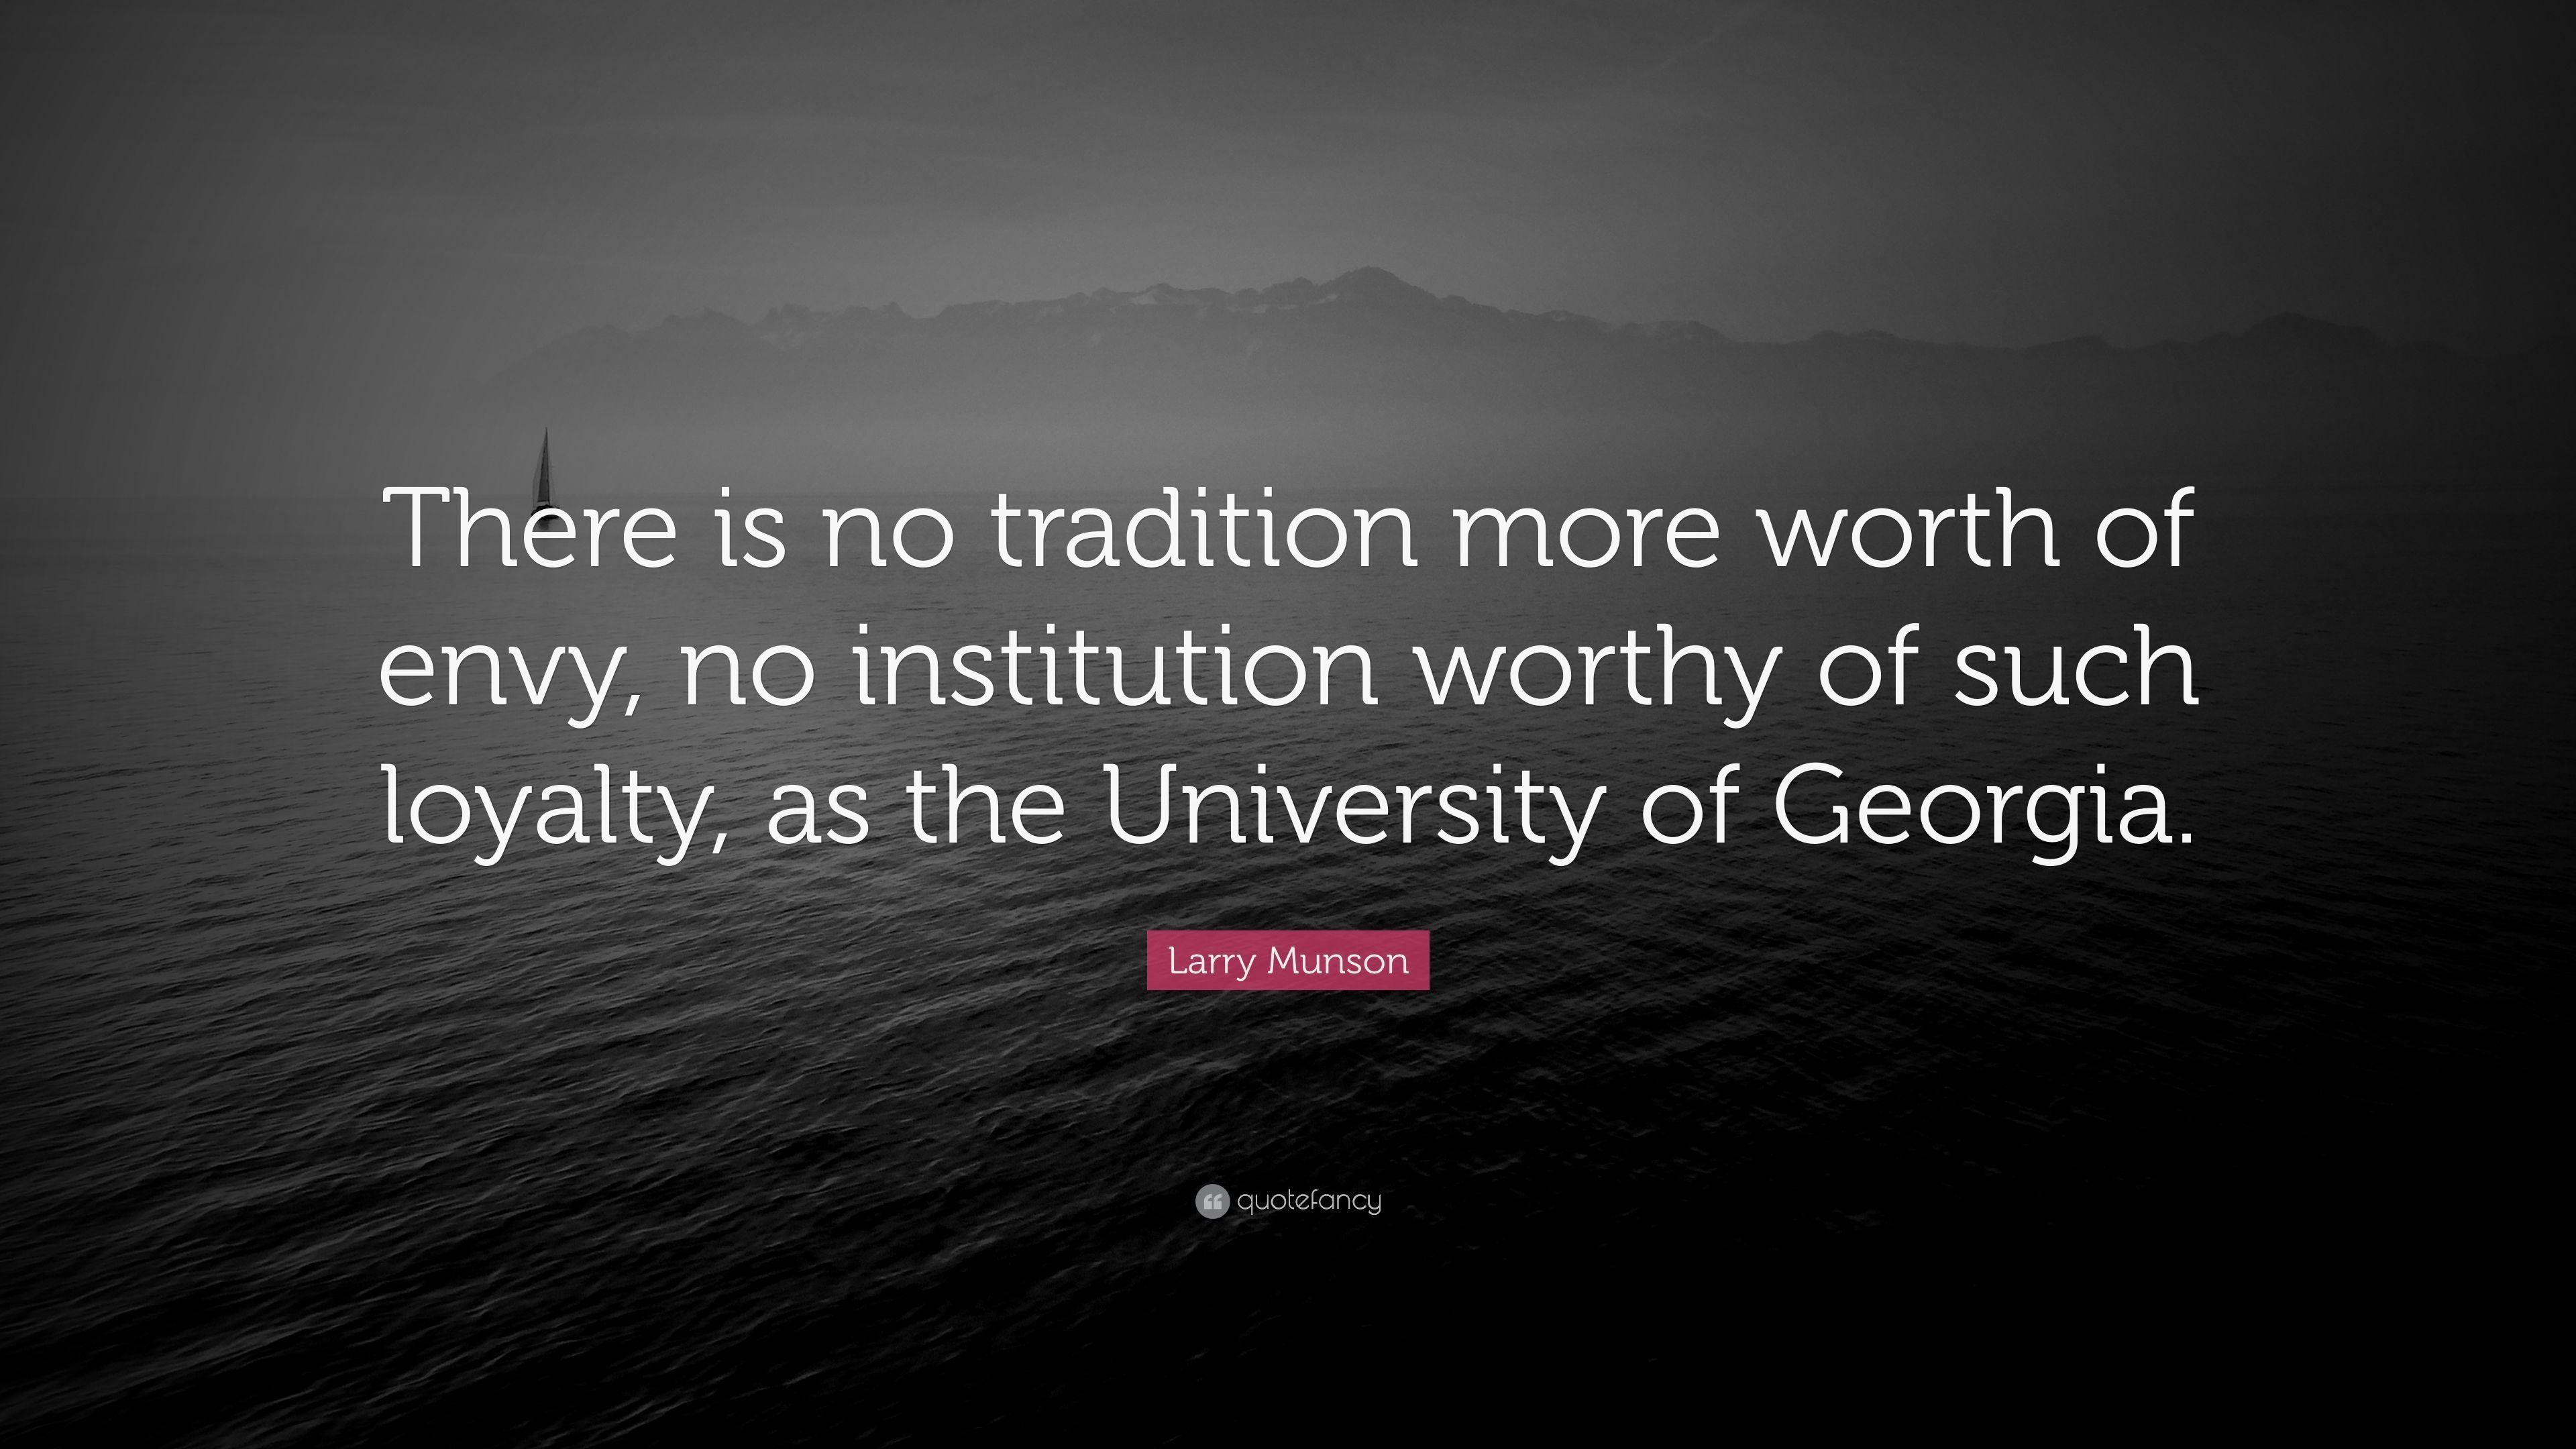 Larry Munson Quote: “There is no tradition more worth of envy, no